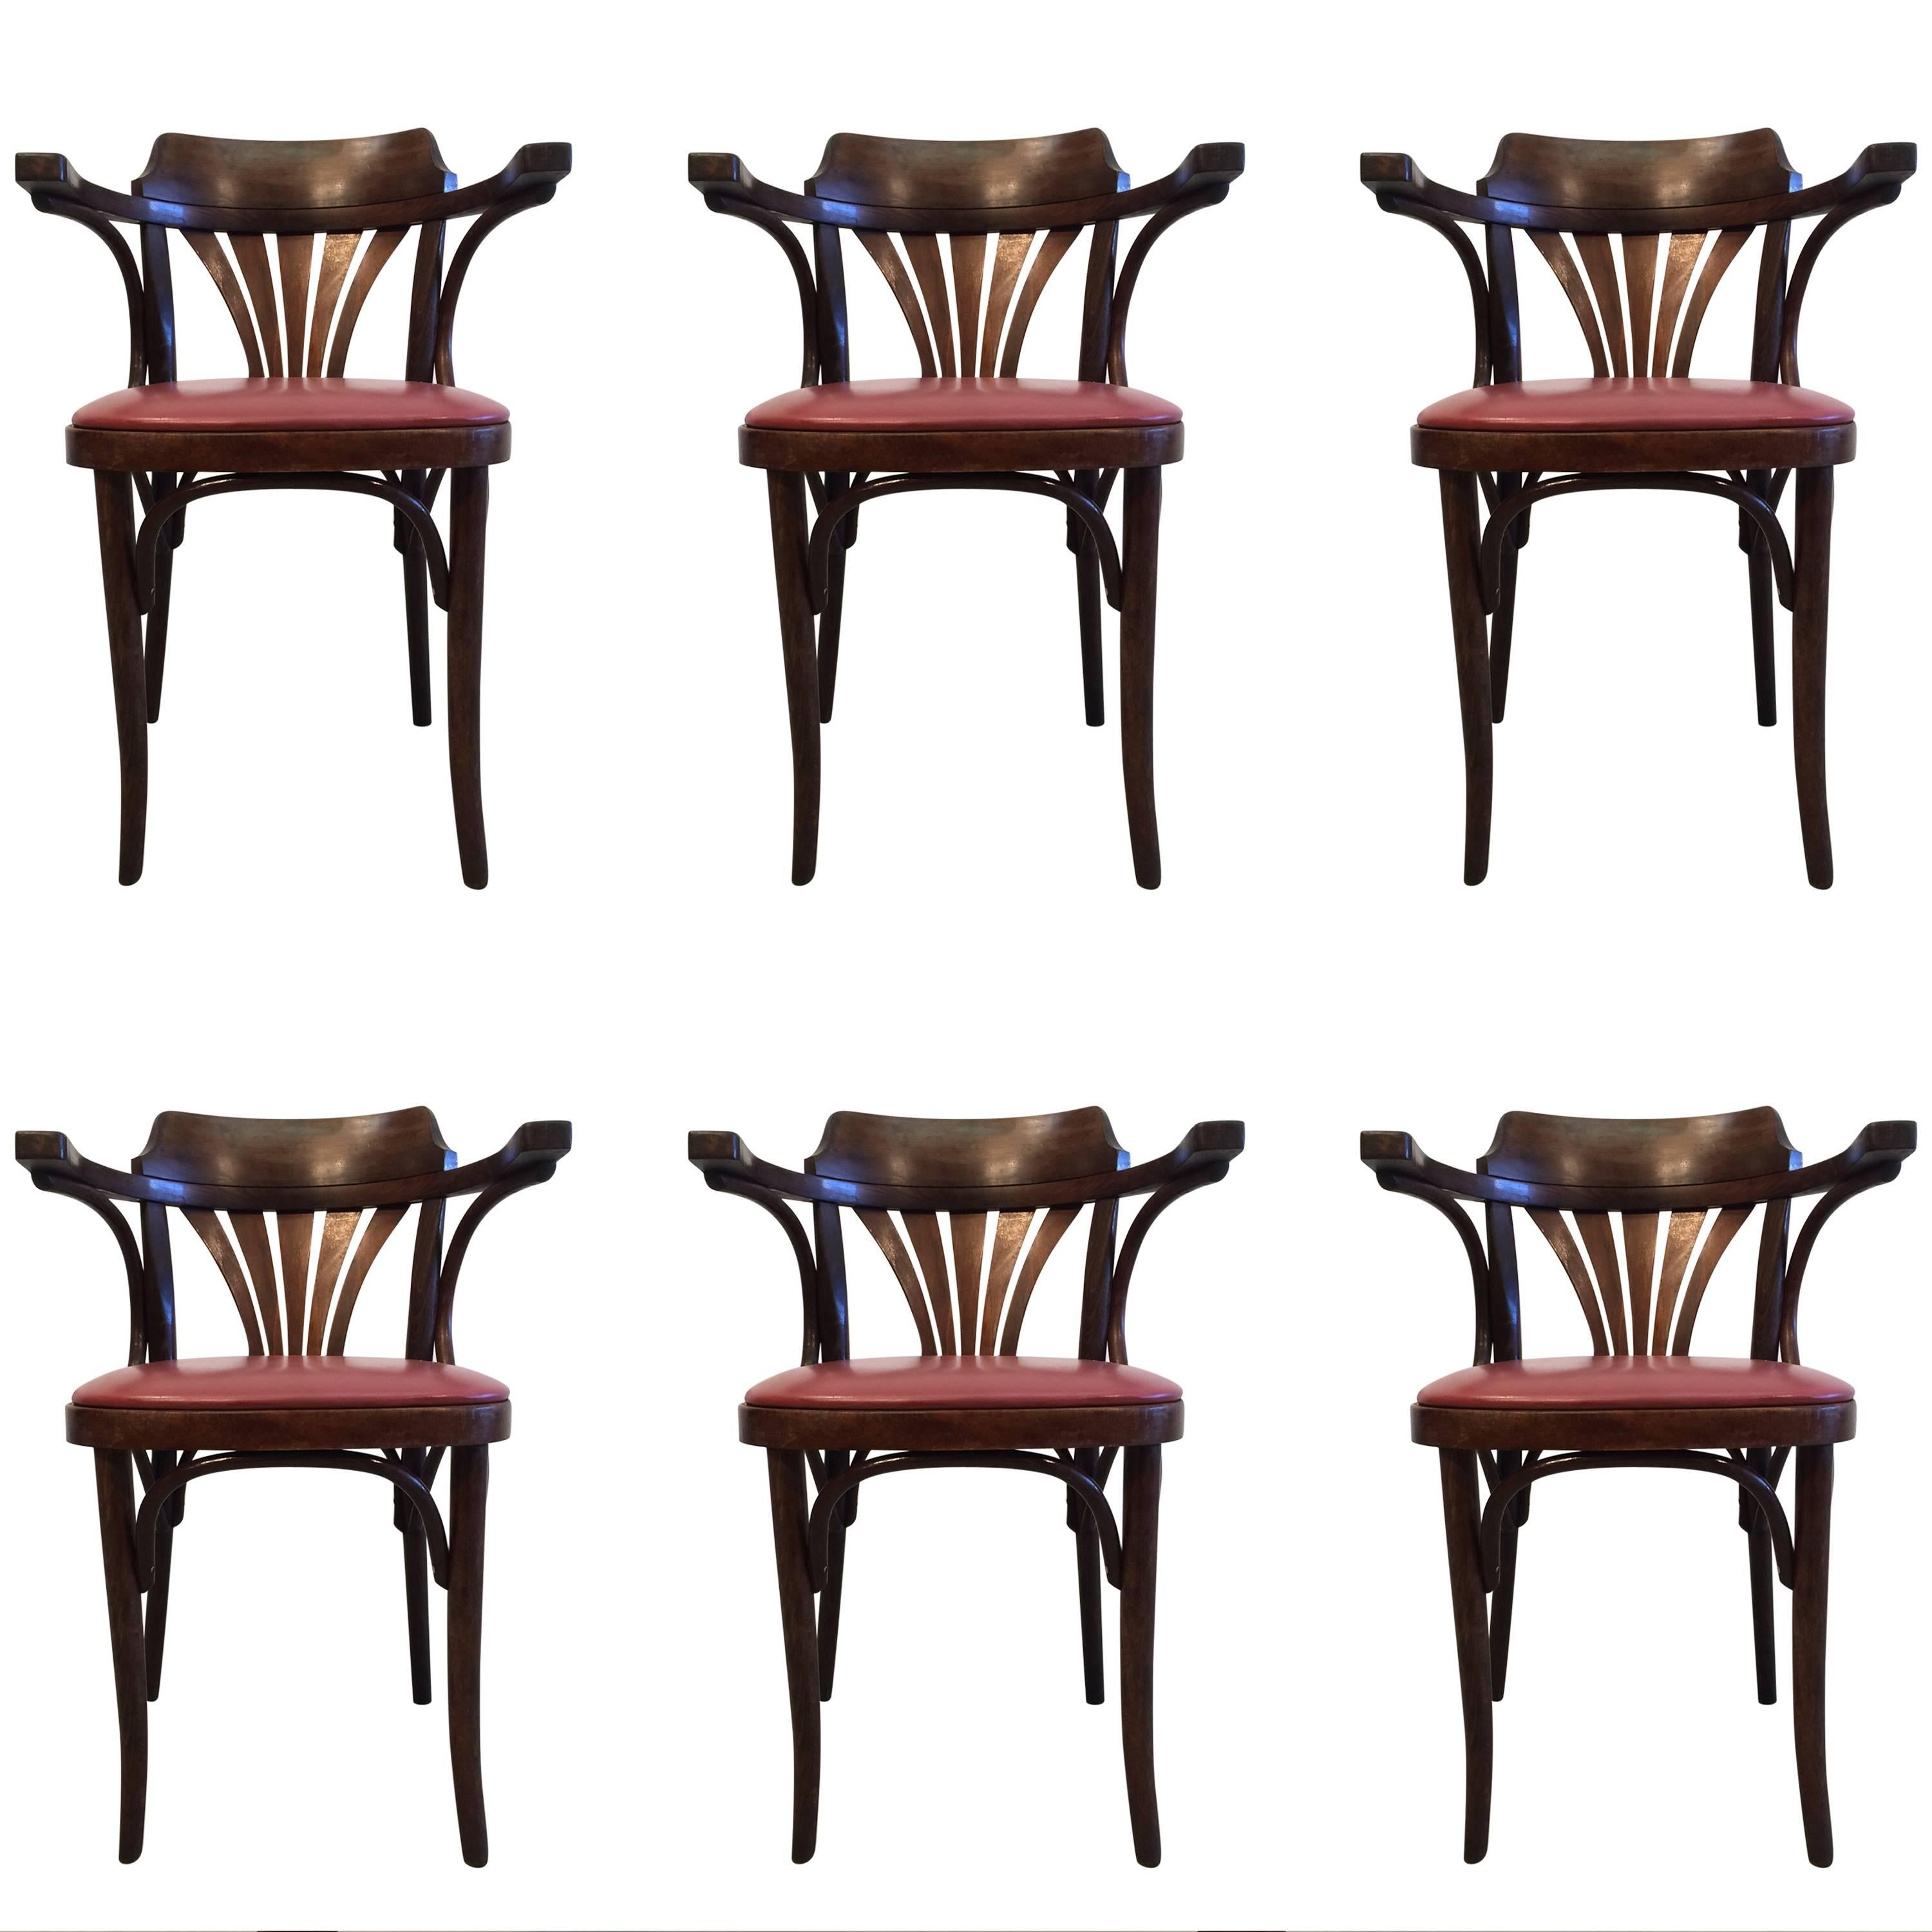 Six Bentwood Chairs by Drevounia, Czech Republic, 1950s, 12 Chairs Available